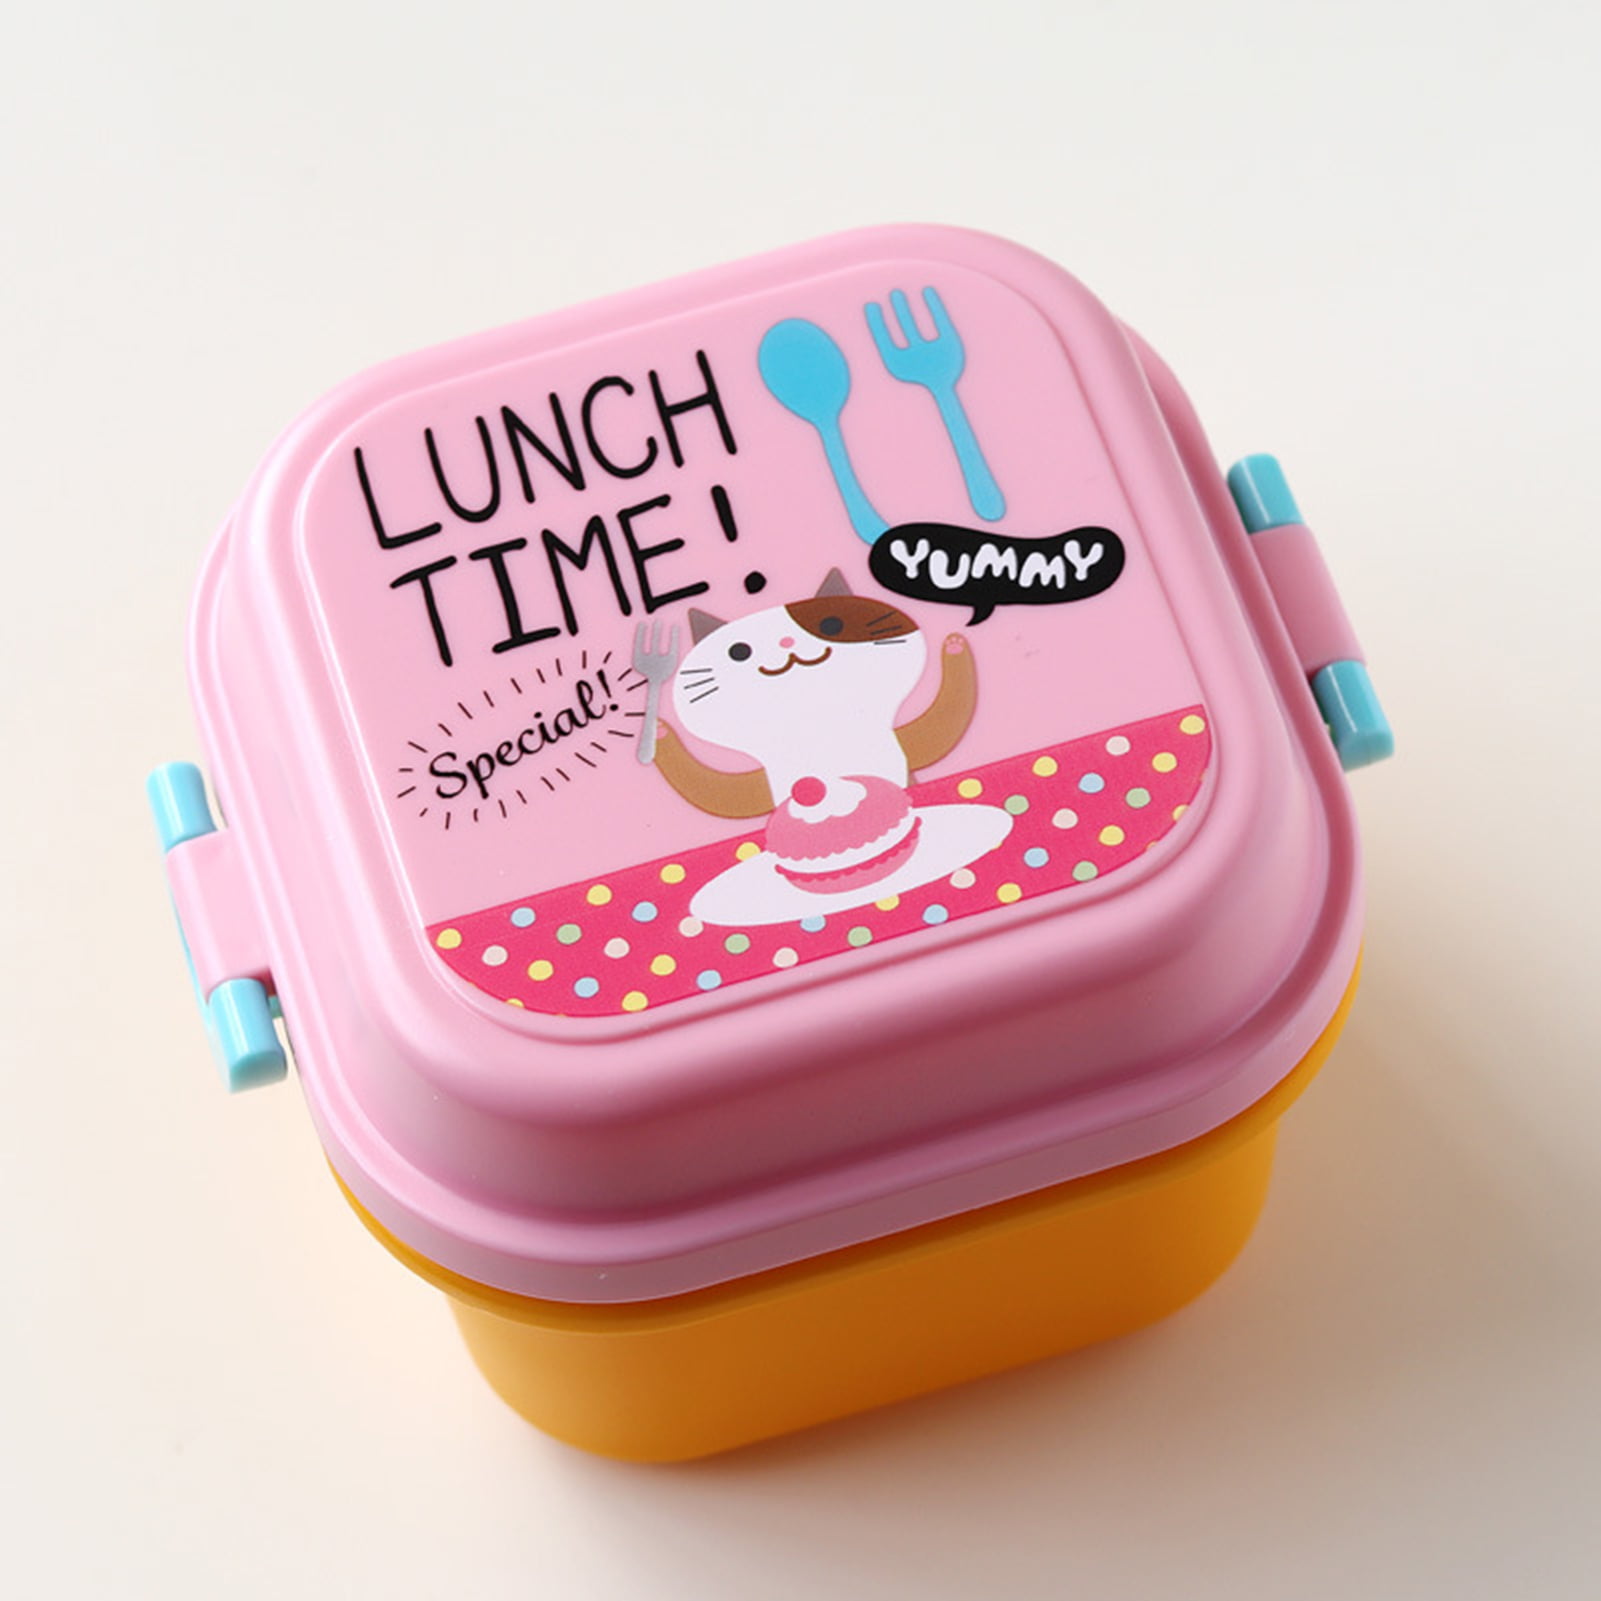 Paidideng Kawaii Bento Box Bento Lunch Box with Lunch Bag,Tableware,Biscuit  bags,2 Layers Stacked Le…See more Paidideng Kawaii Bento Box Bento Lunch